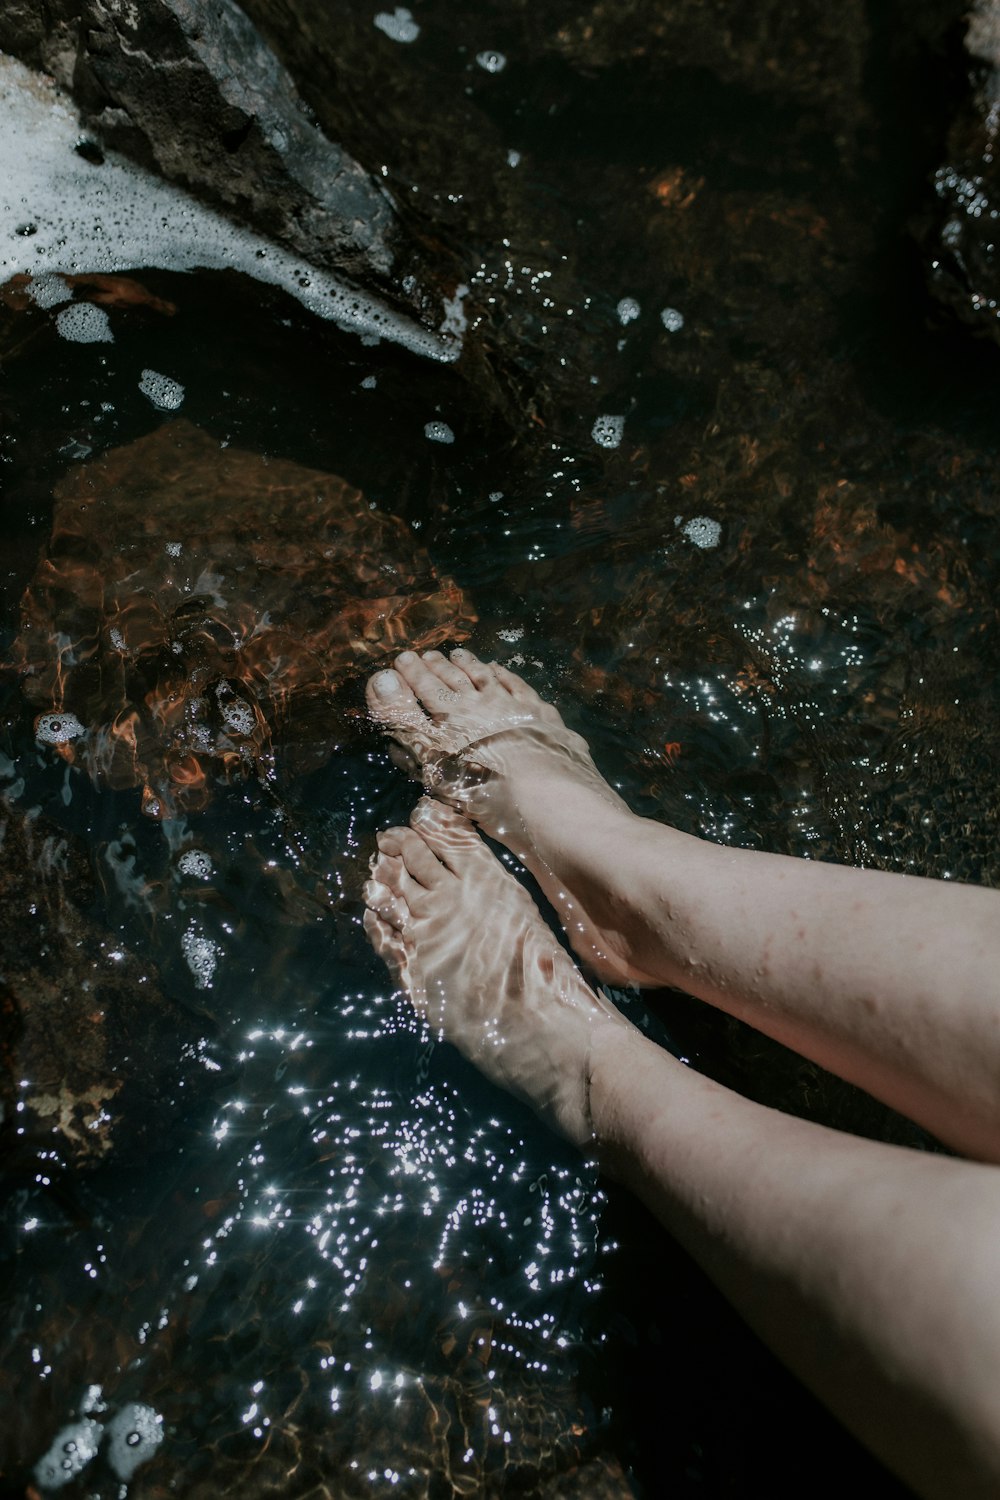 a person's bare feet in a stream of water